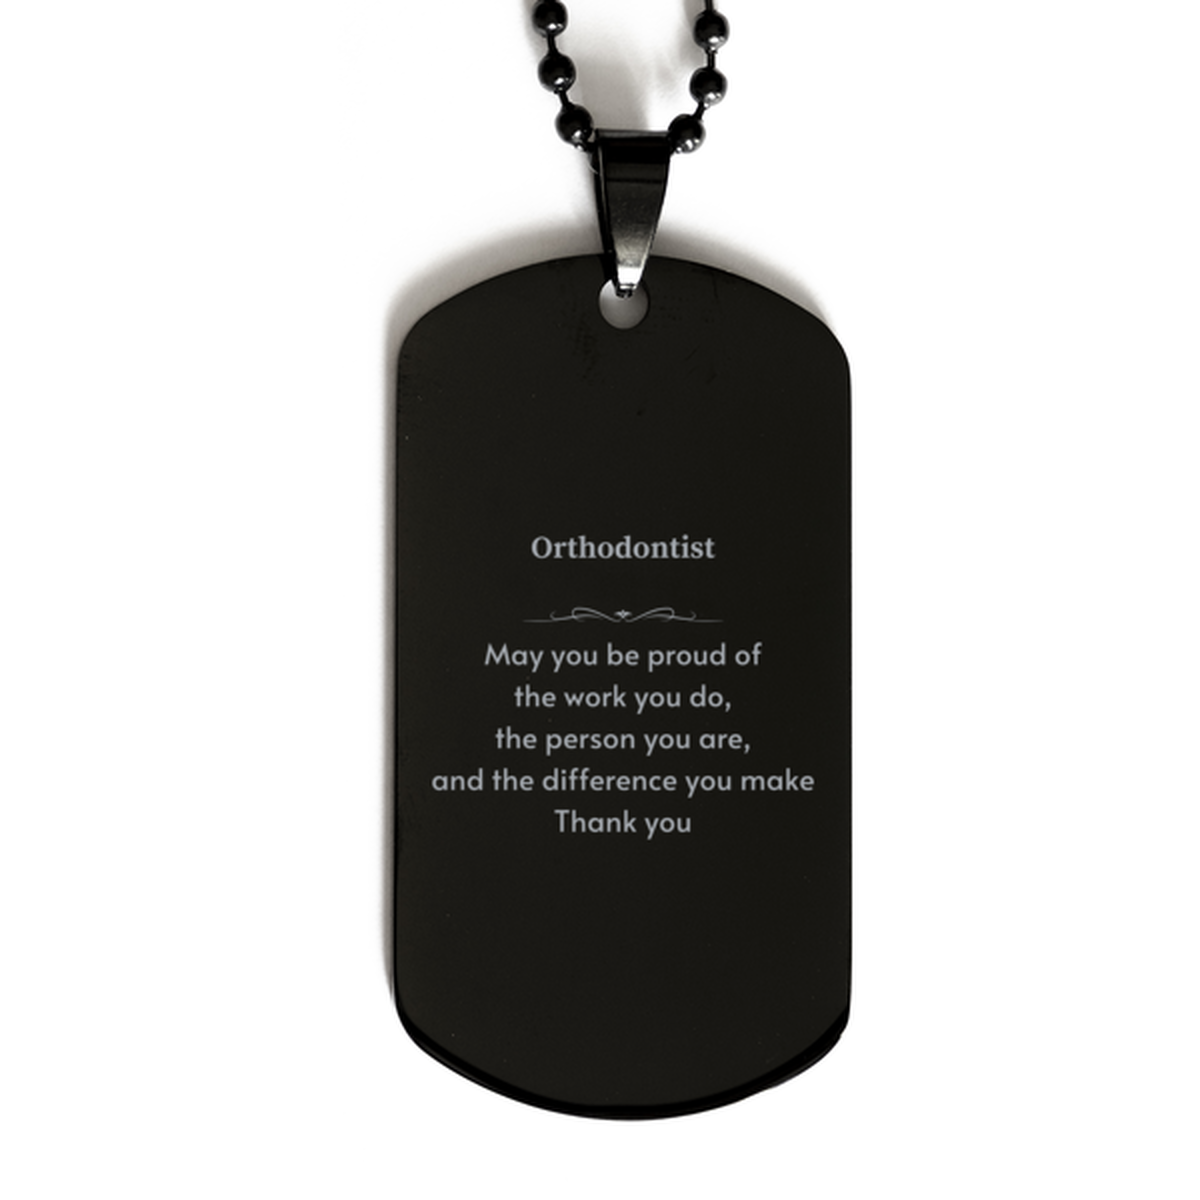 Heartwarming Black Dog Tag Retirement Coworkers Gifts for Orthodontist, Orthodontist May You be proud of the work you do, the person you are Gifts for Boss Men Women Friends